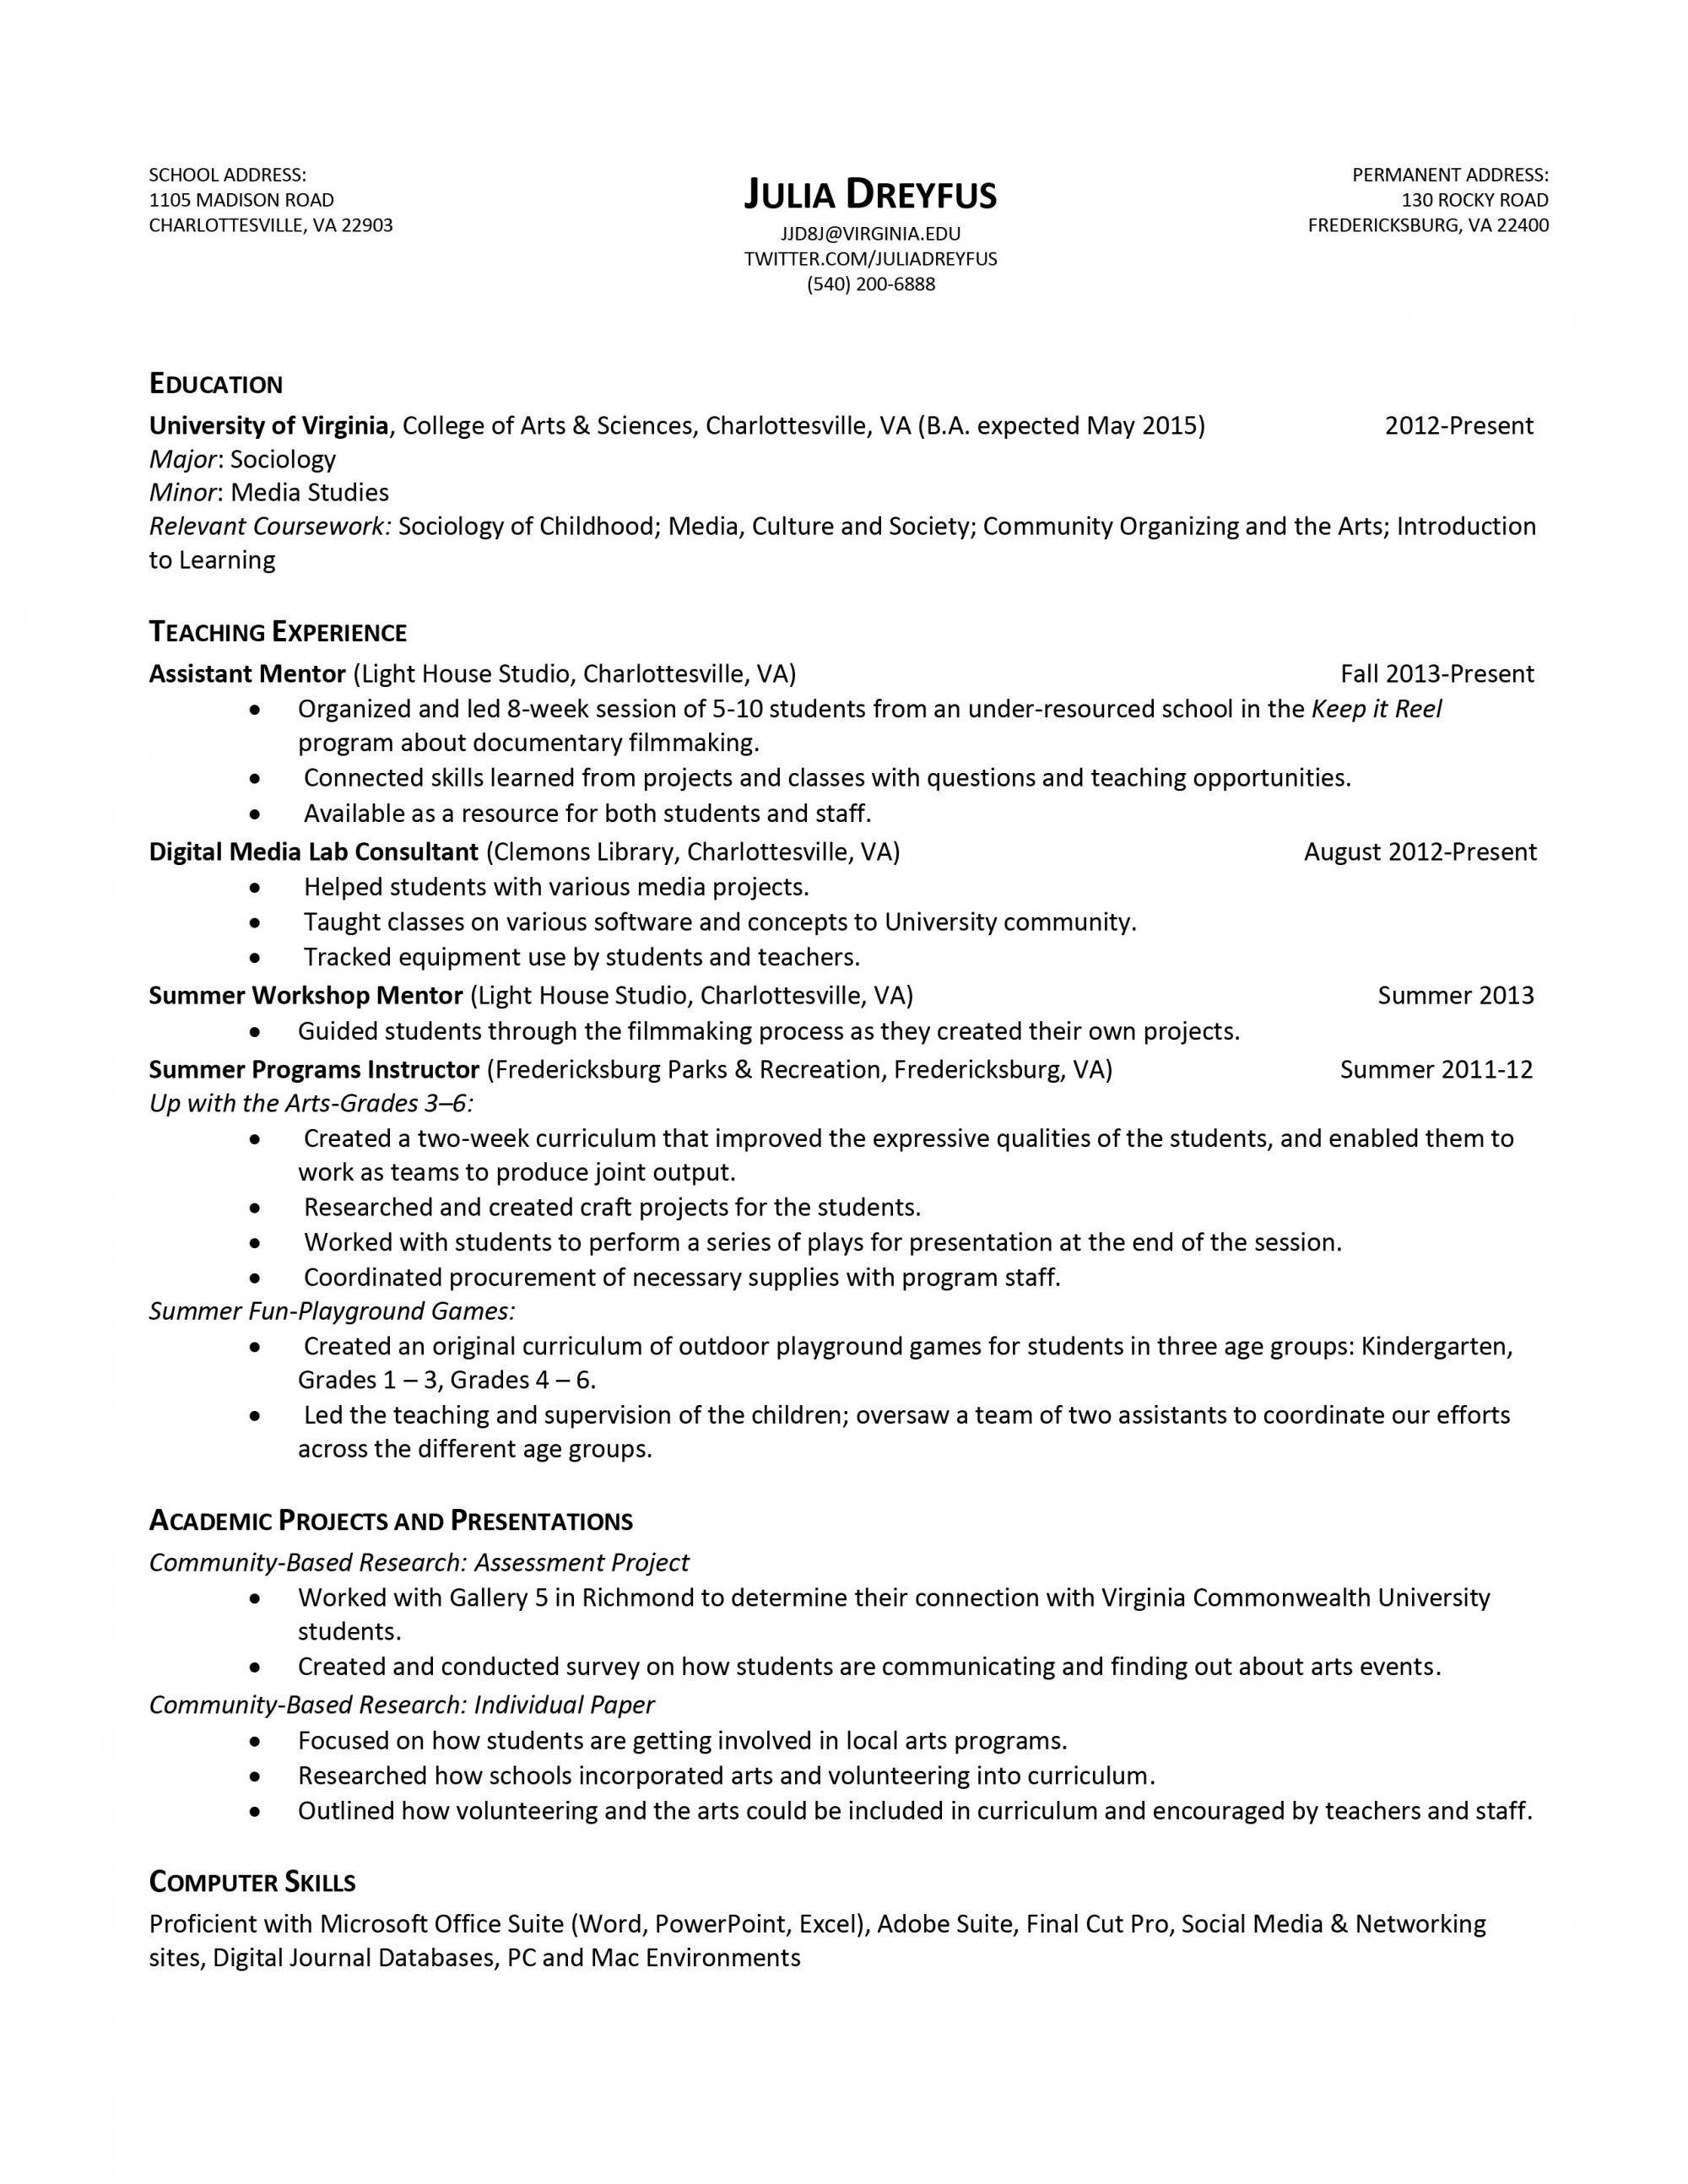 Resume for Letter Of Recommendation Template - How to Write A Job Resume Best Luxury Examples Resumes Ecologist